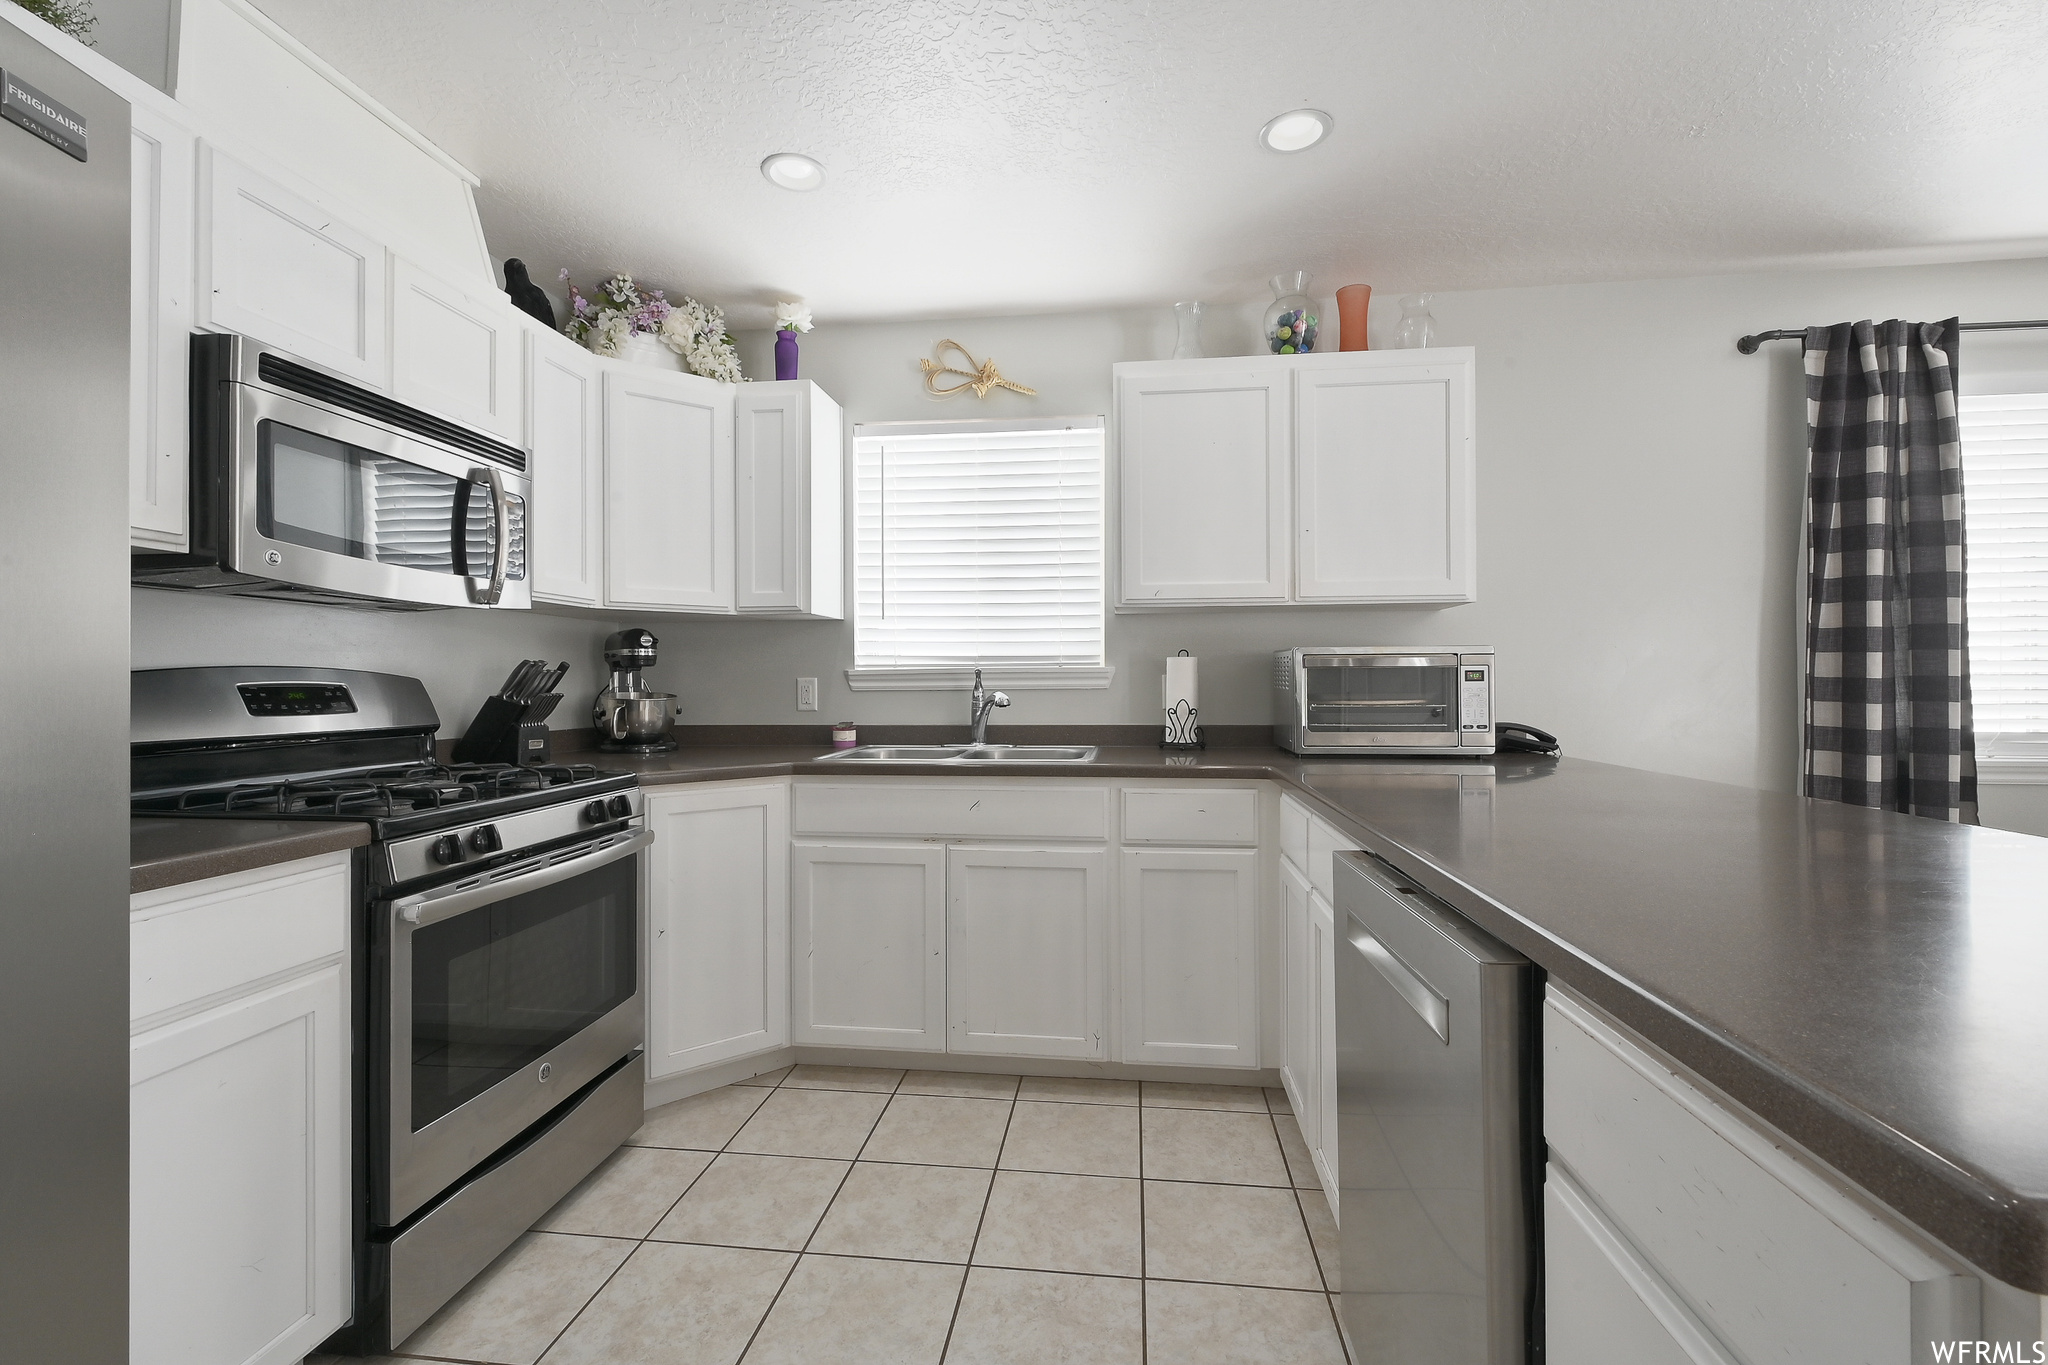 Kitchen featuring light tile floors, sink, stainless steel appliances, and white cabinetry